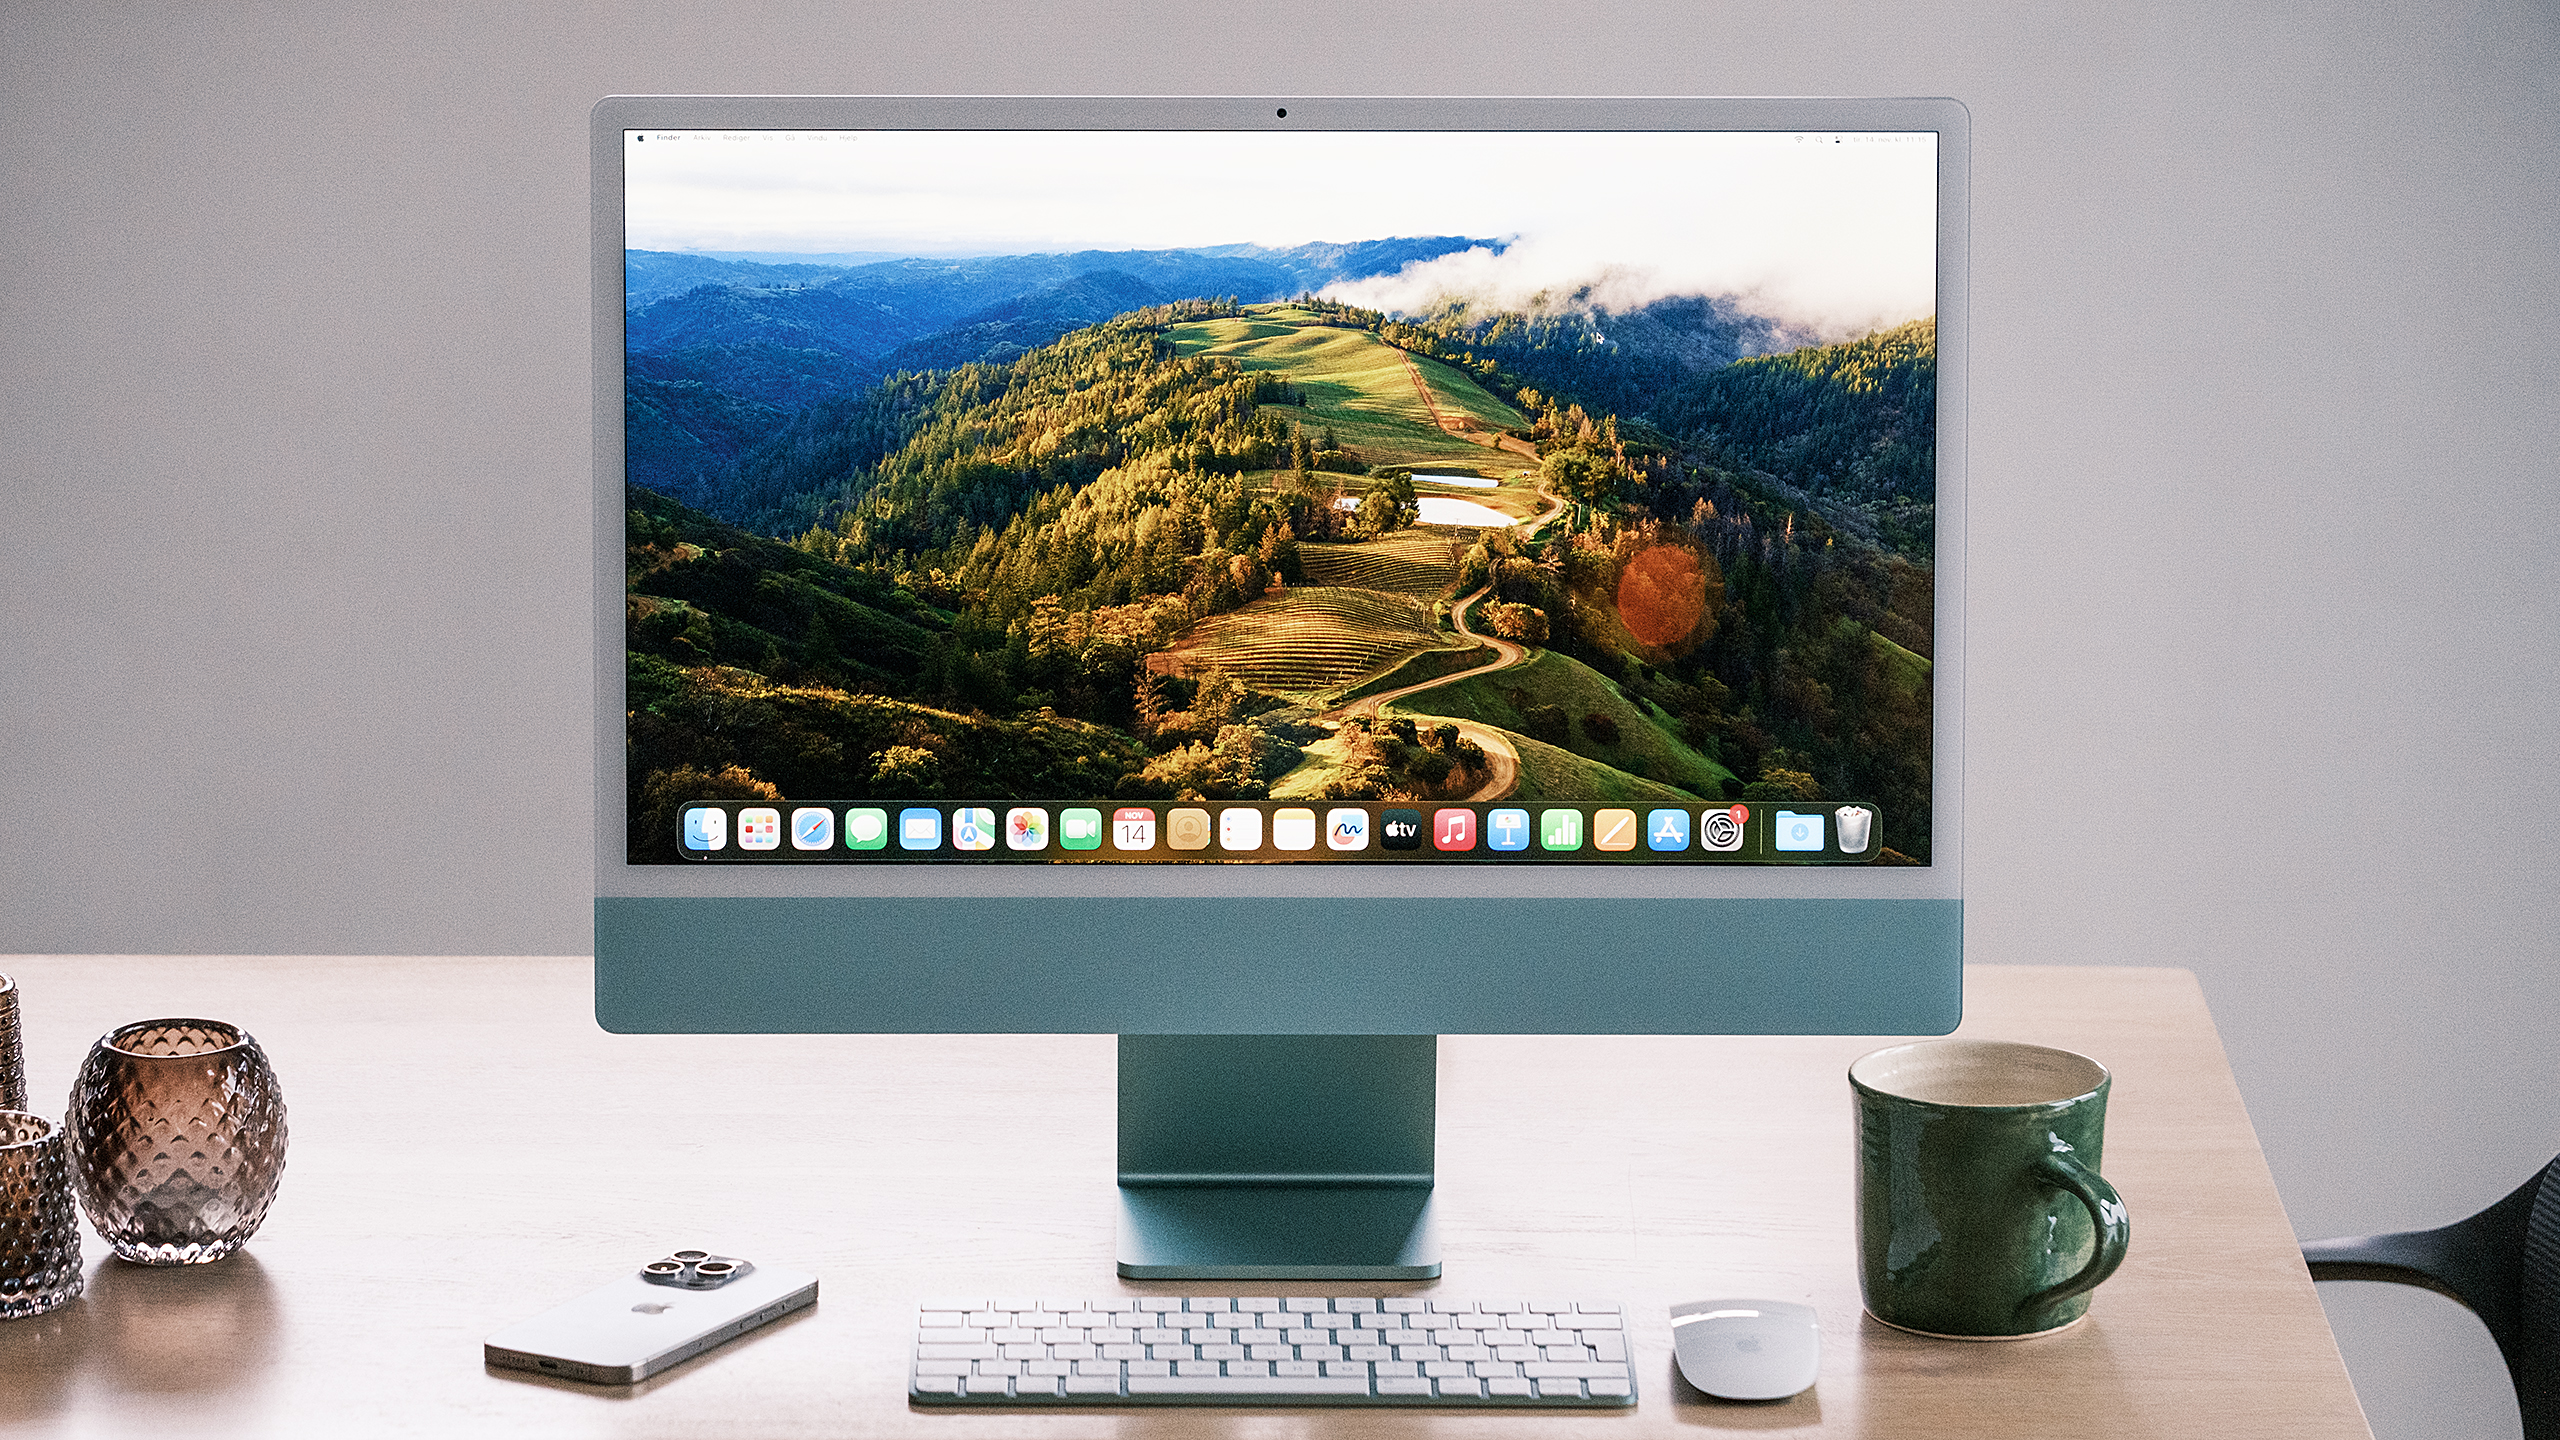 Apple iMac M3 review: Pricey, but a worthy all-in-one with good performance